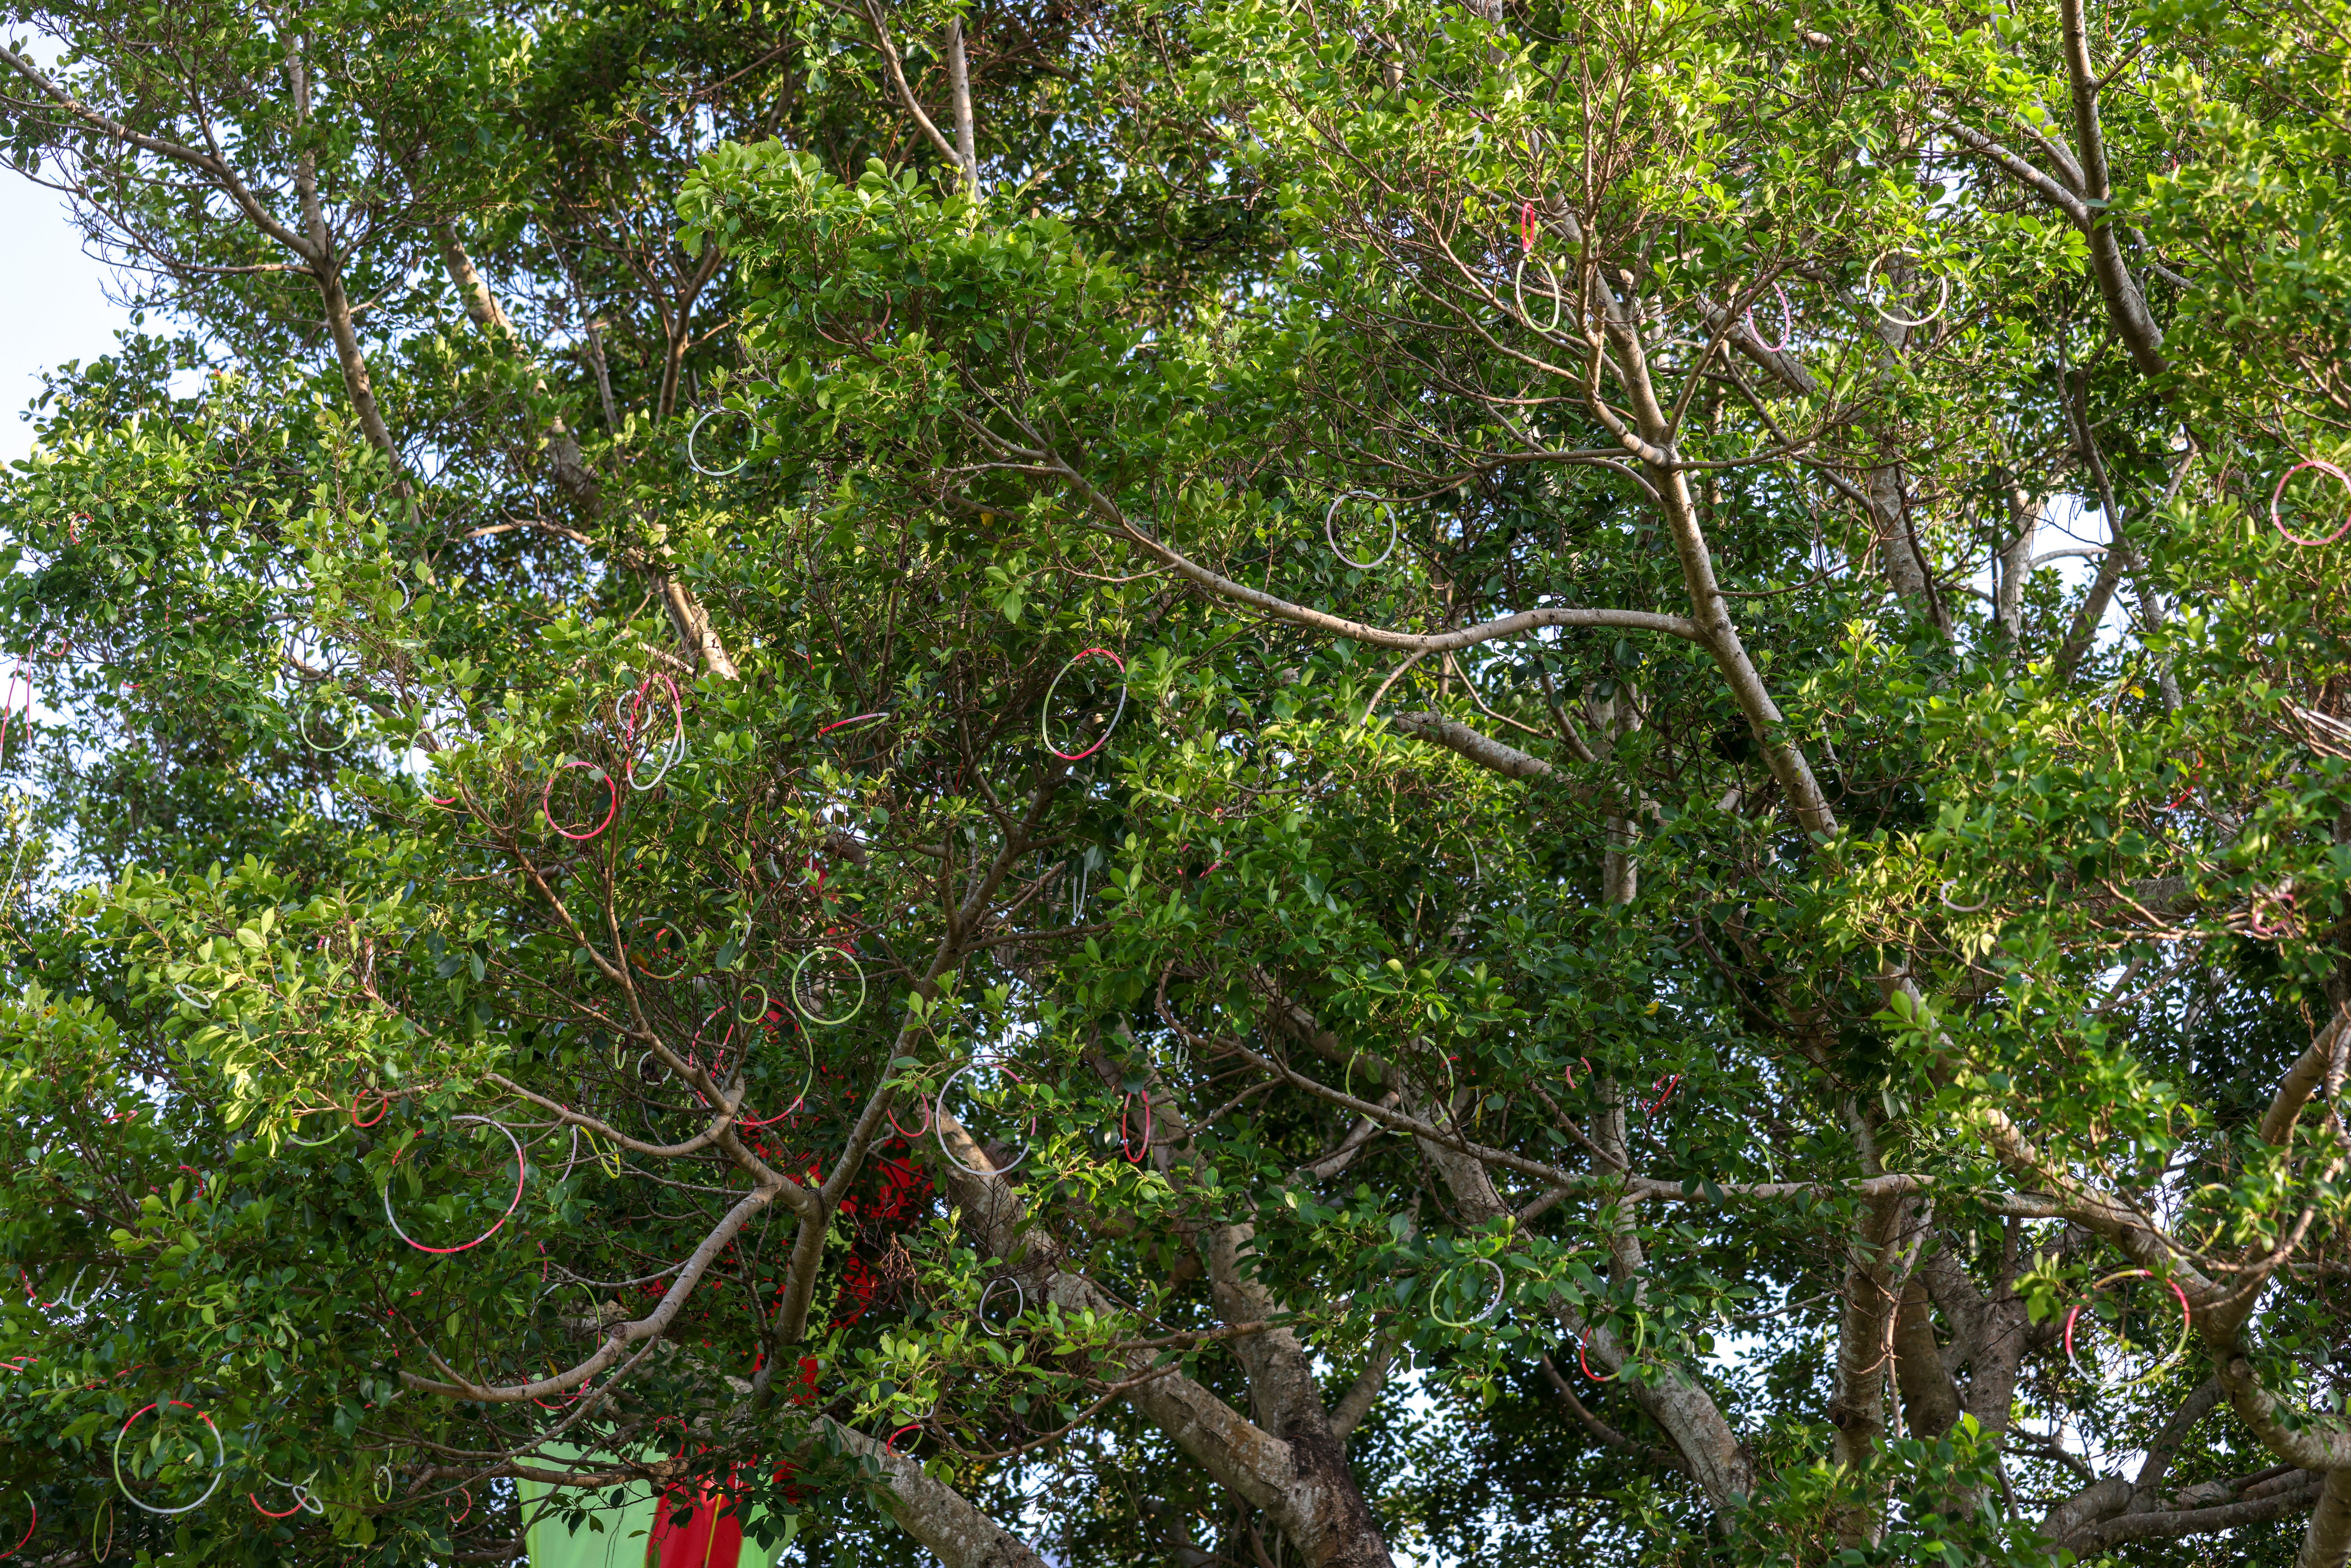 Residents threw the plastic glowsticks into the branches of the Chinese banyan in Tai Po. Photo: Yik Yeung-man